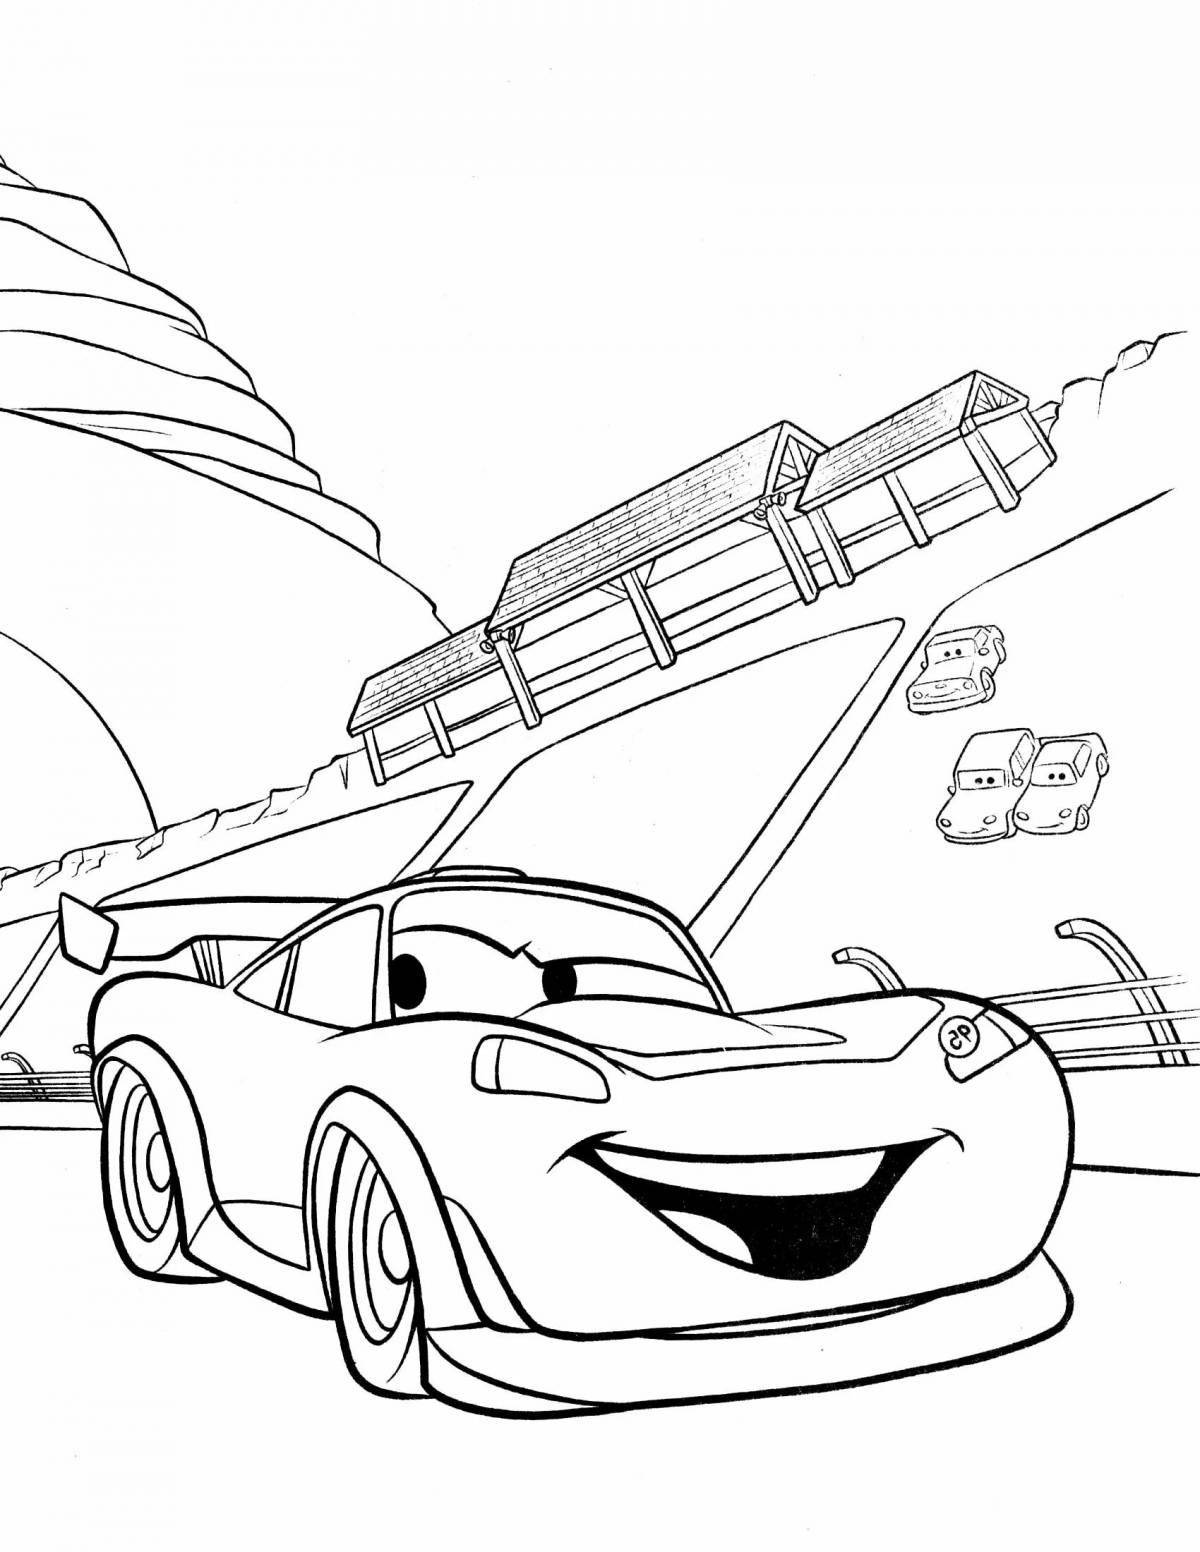 Lightning mcqueen's awesome coloring book